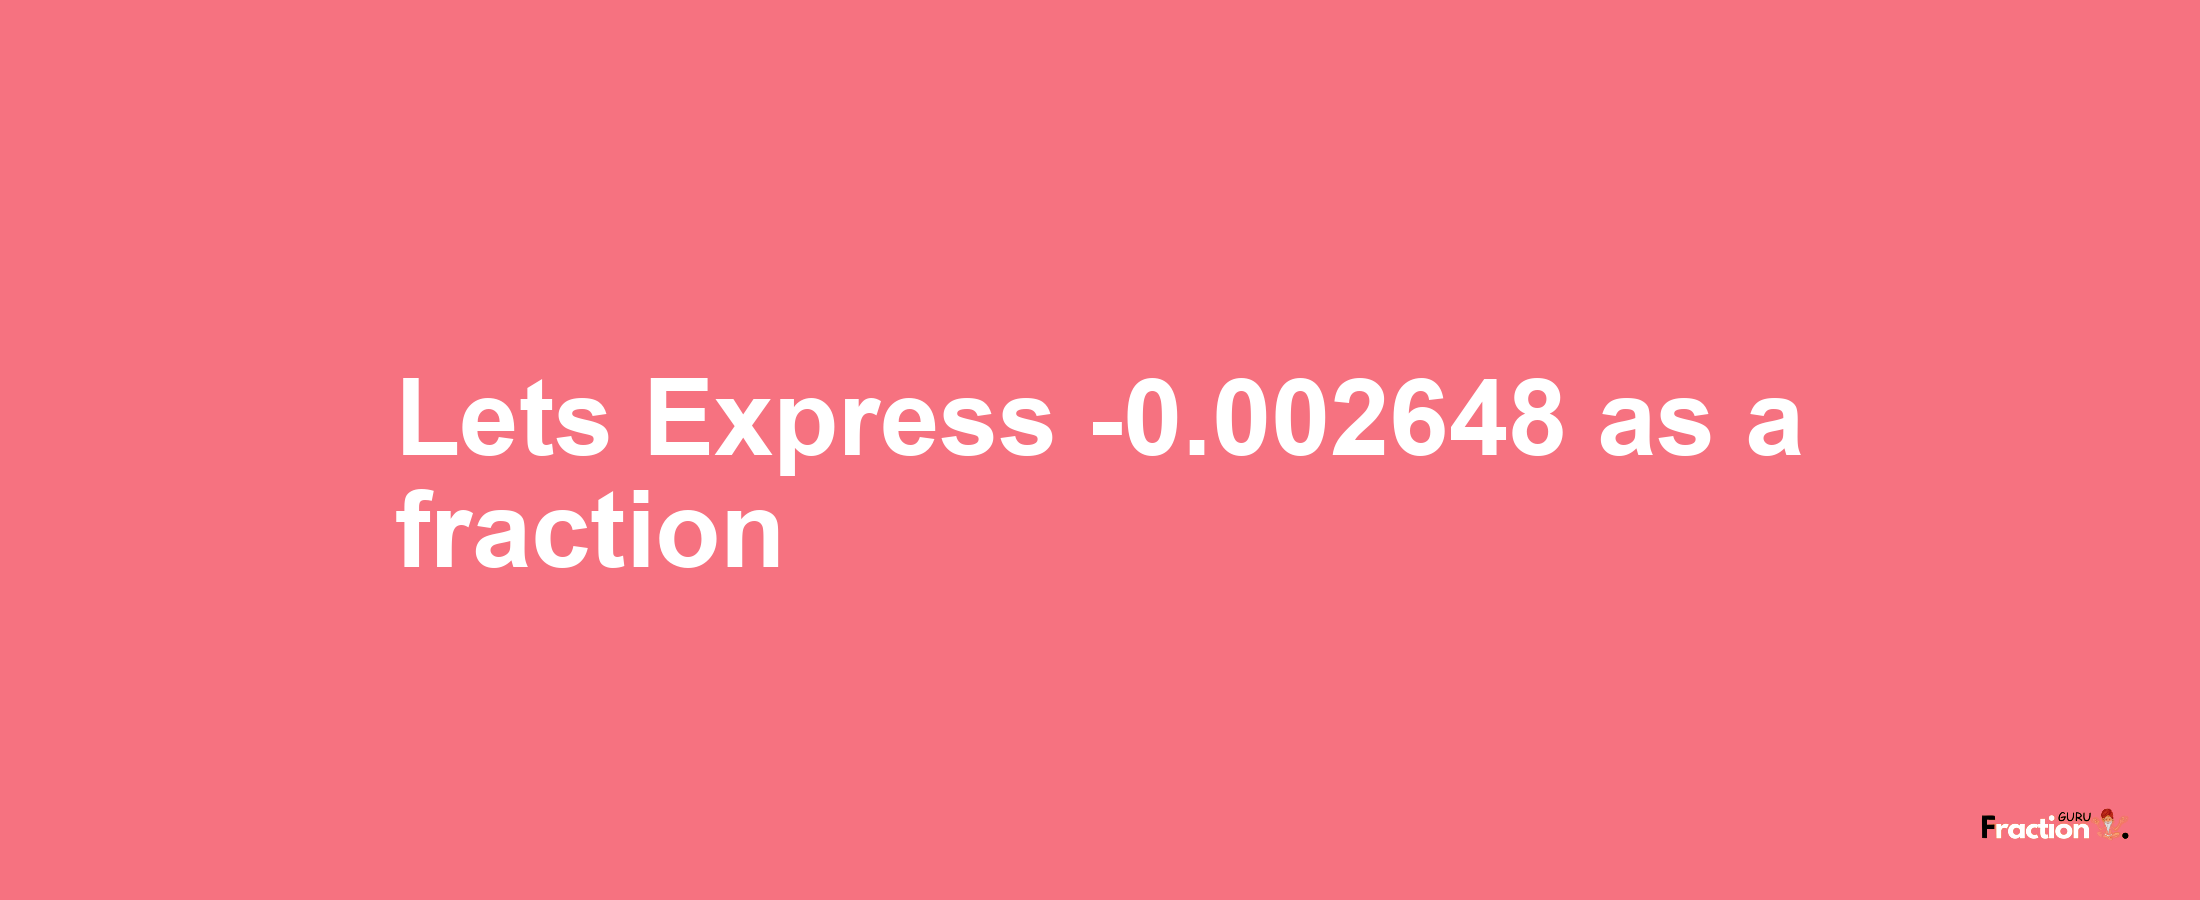 Lets Express -0.002648 as afraction